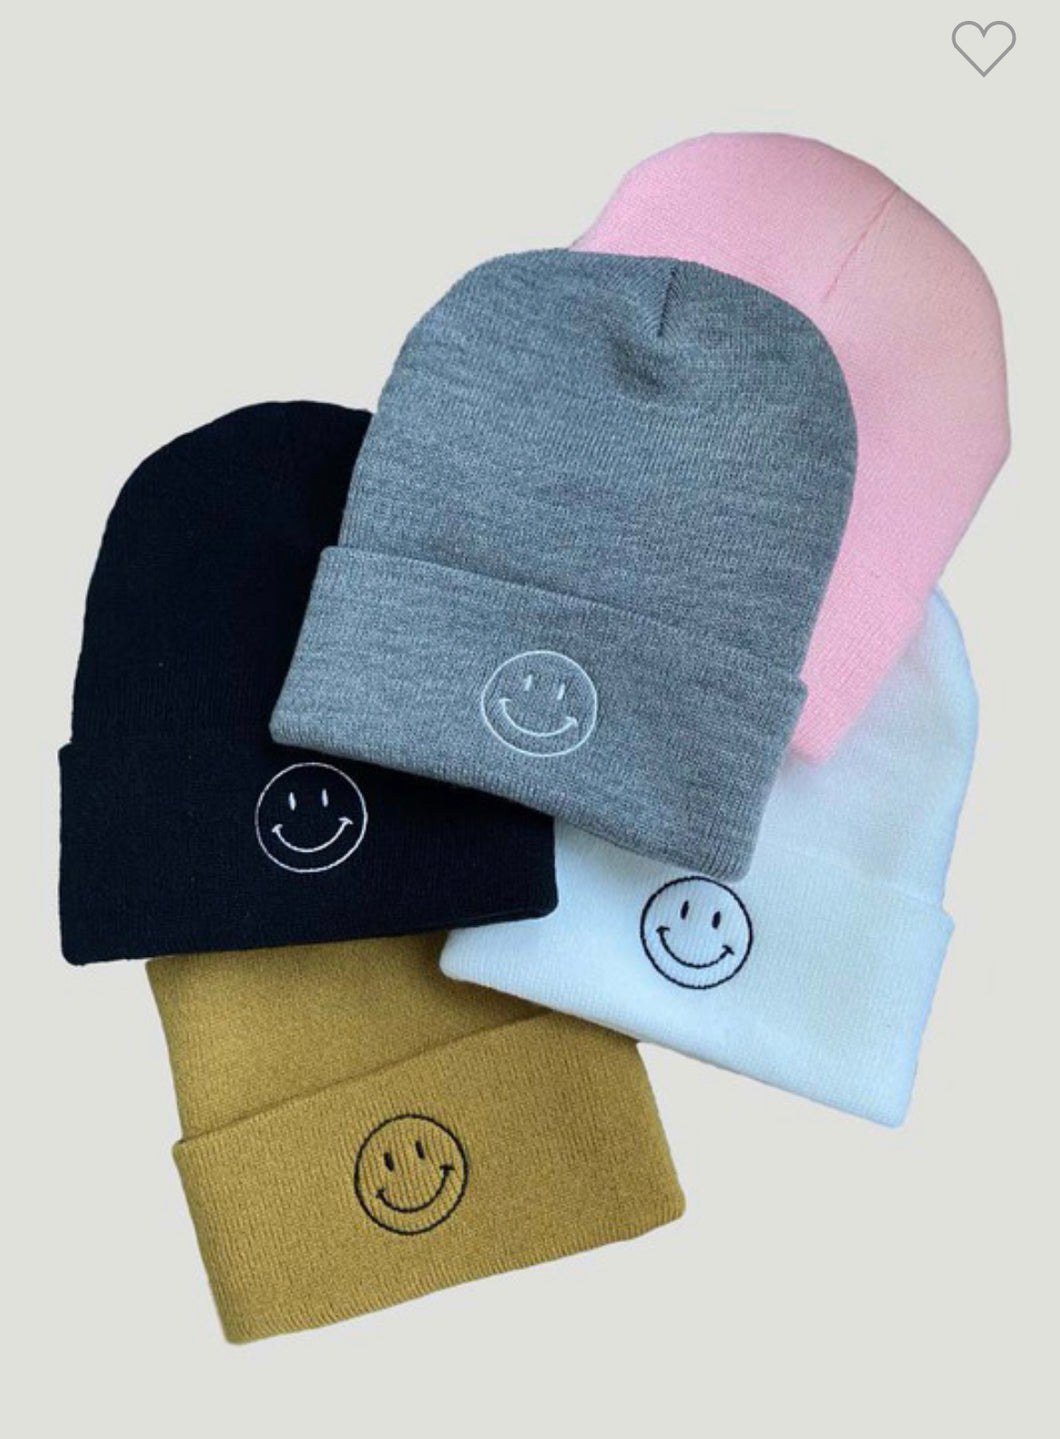 SMILEY FACE BEANIES | ACCESSORIES